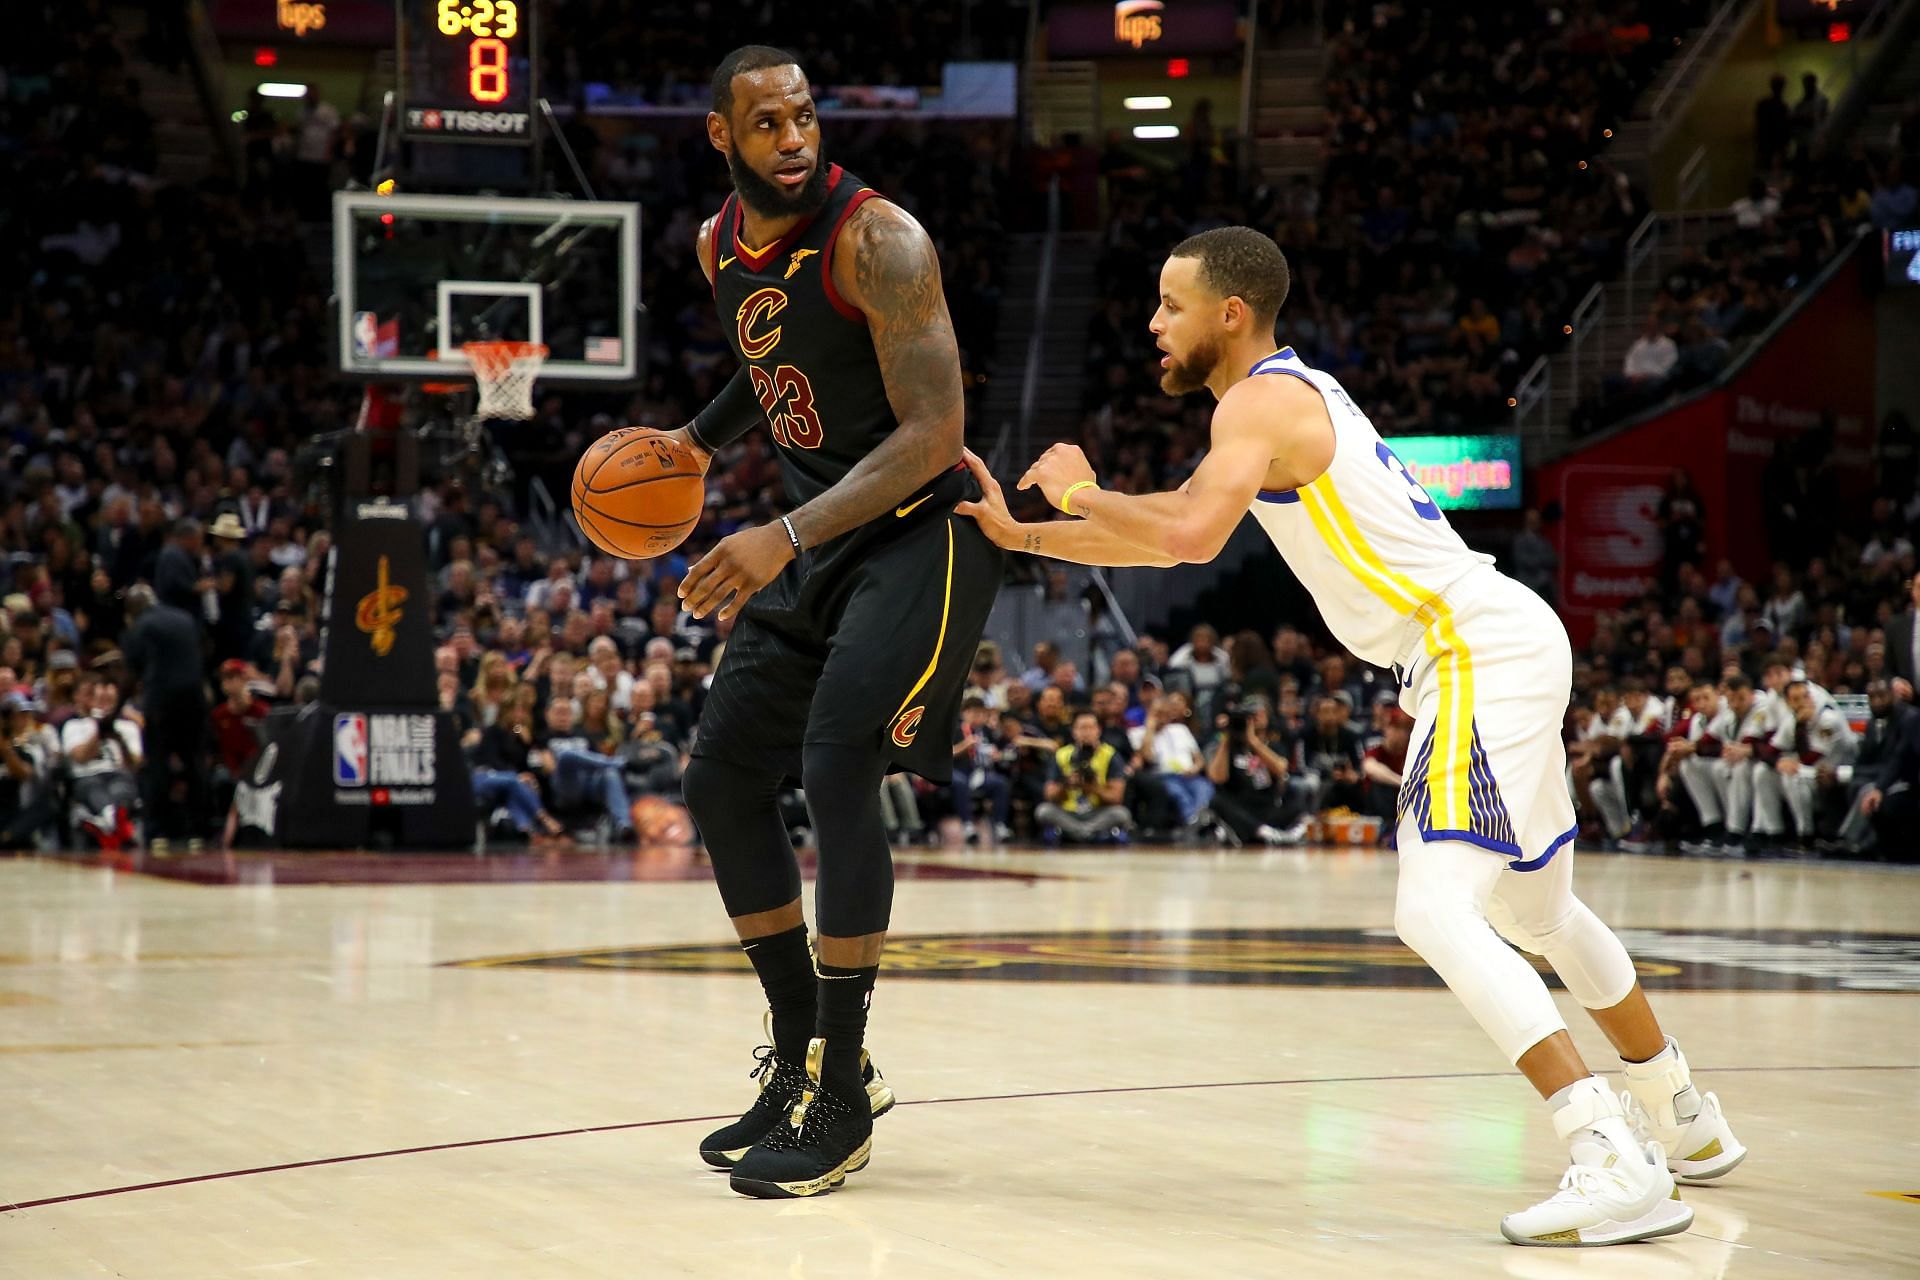 According to Stoudemire, LeBron James and the Golden State Warriors are the modern dynasties.